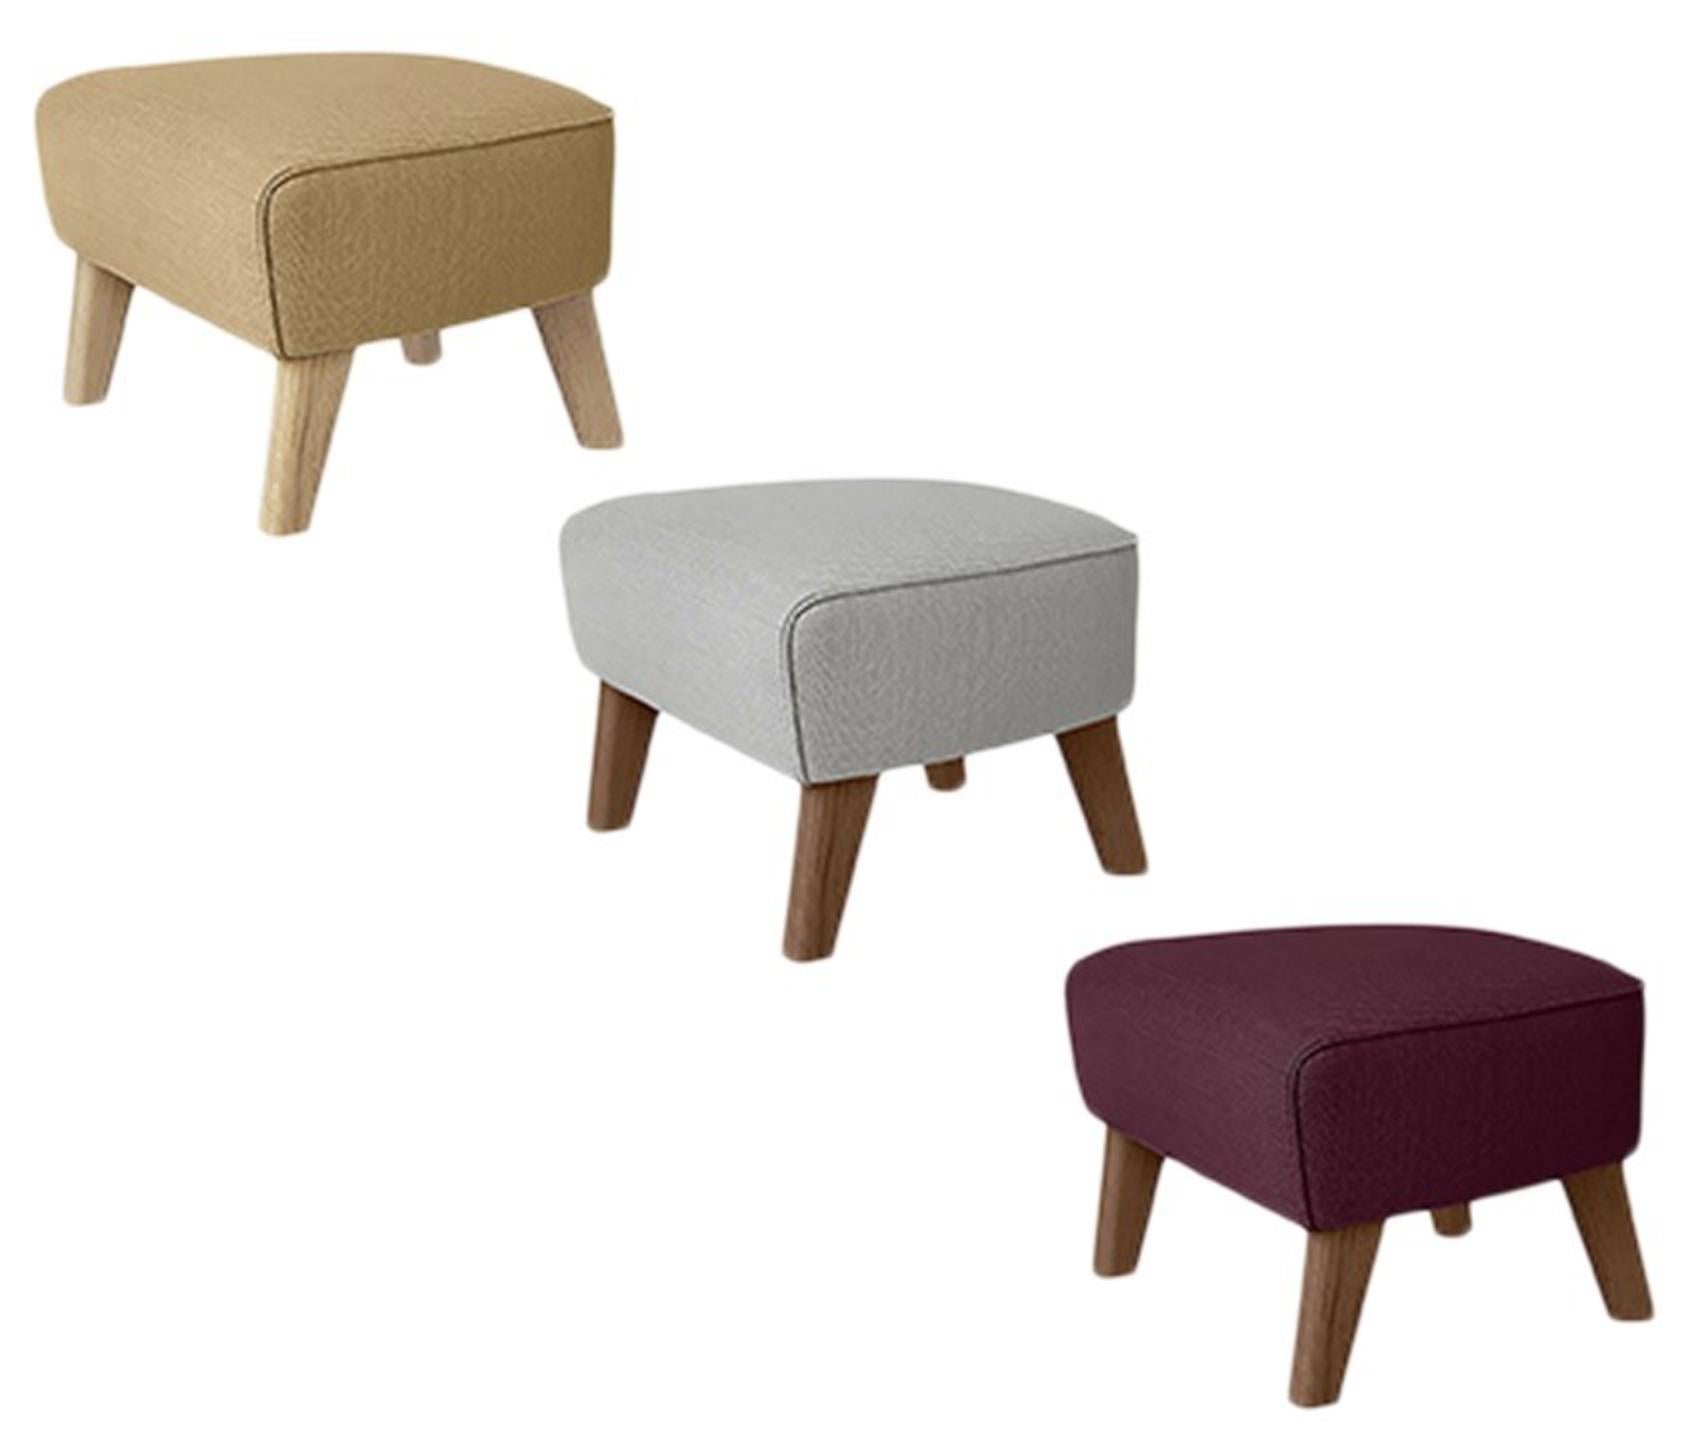 Other Set of 4 Blue, Natural Oak Raf Simons Vidar 3 My Own Chair Footstools by Lassen For Sale